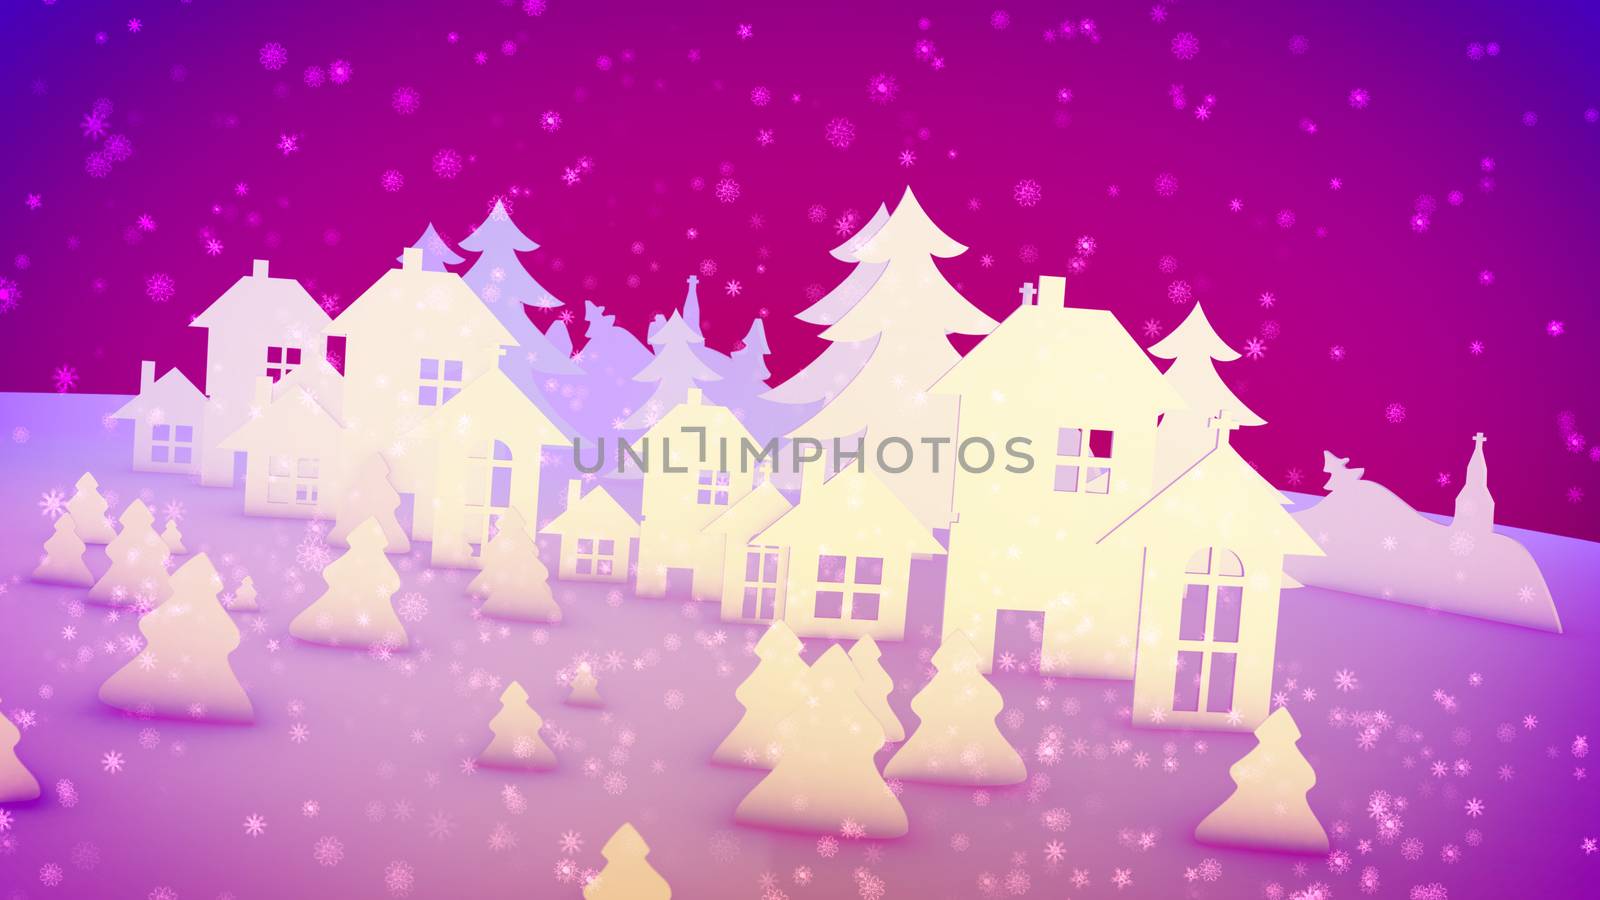 Christmas paper images in pink background by klss